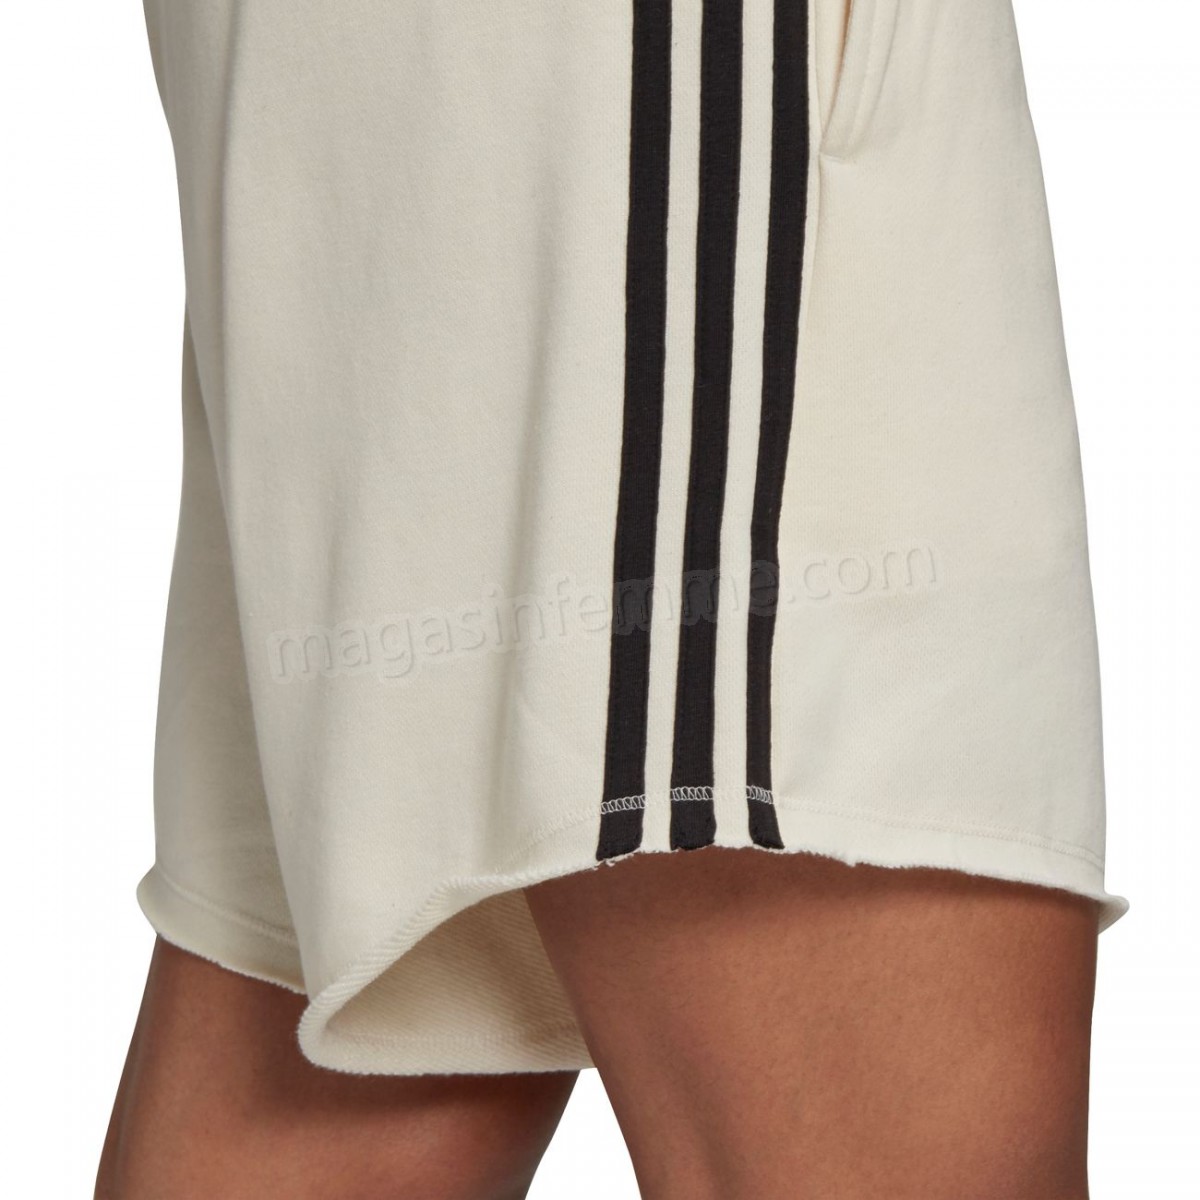 Adidas-Fitness femme ADIDAS Short femme adidas Must Haves Recycled Cotton en solde - -9